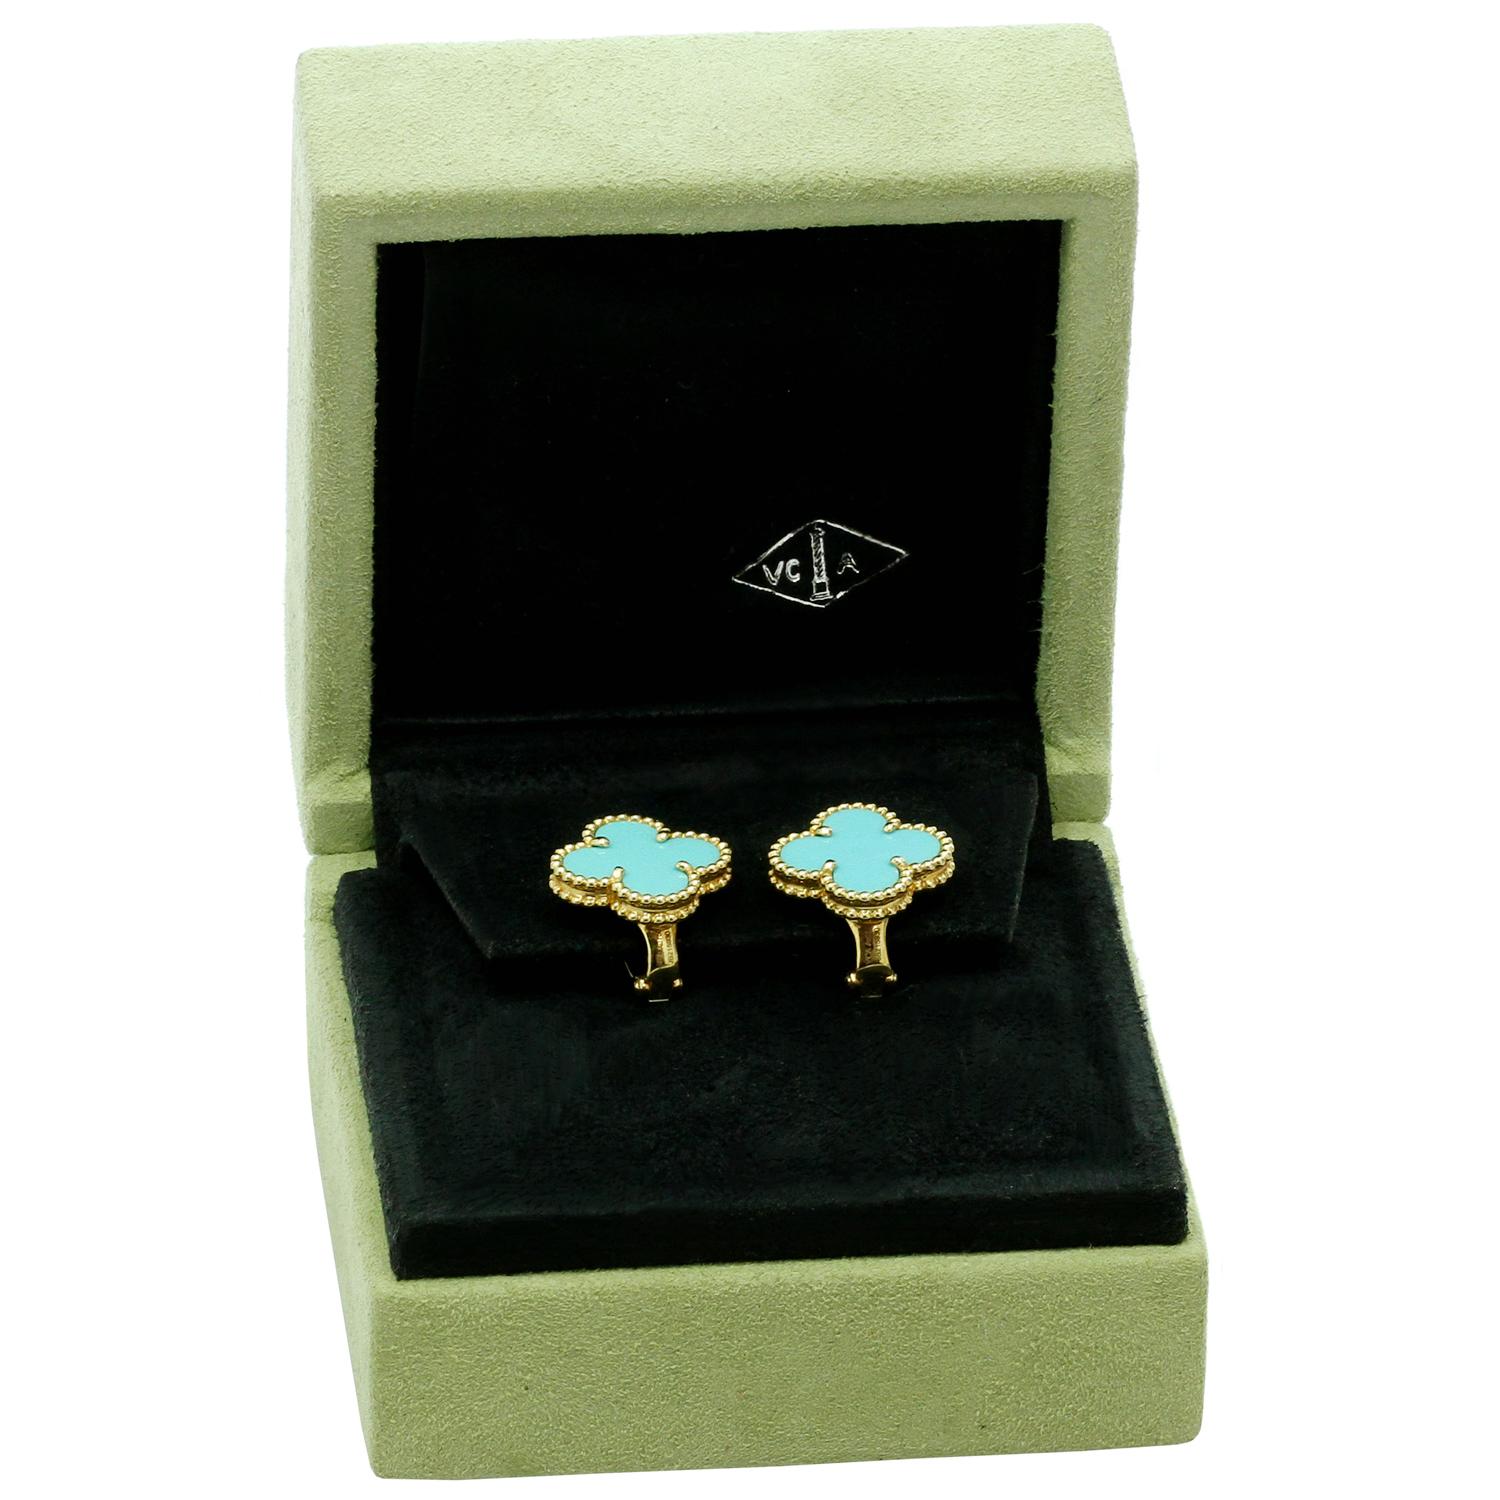 These elegant Van Cleef & Arpels earrings from the Vintage Alhambra collection are crafted in 18k yellow gold and feature a pair of lucky clover motifs inlaid with turquoise in round bead settings. Made in France circa 2000s. Measurements: 0.59